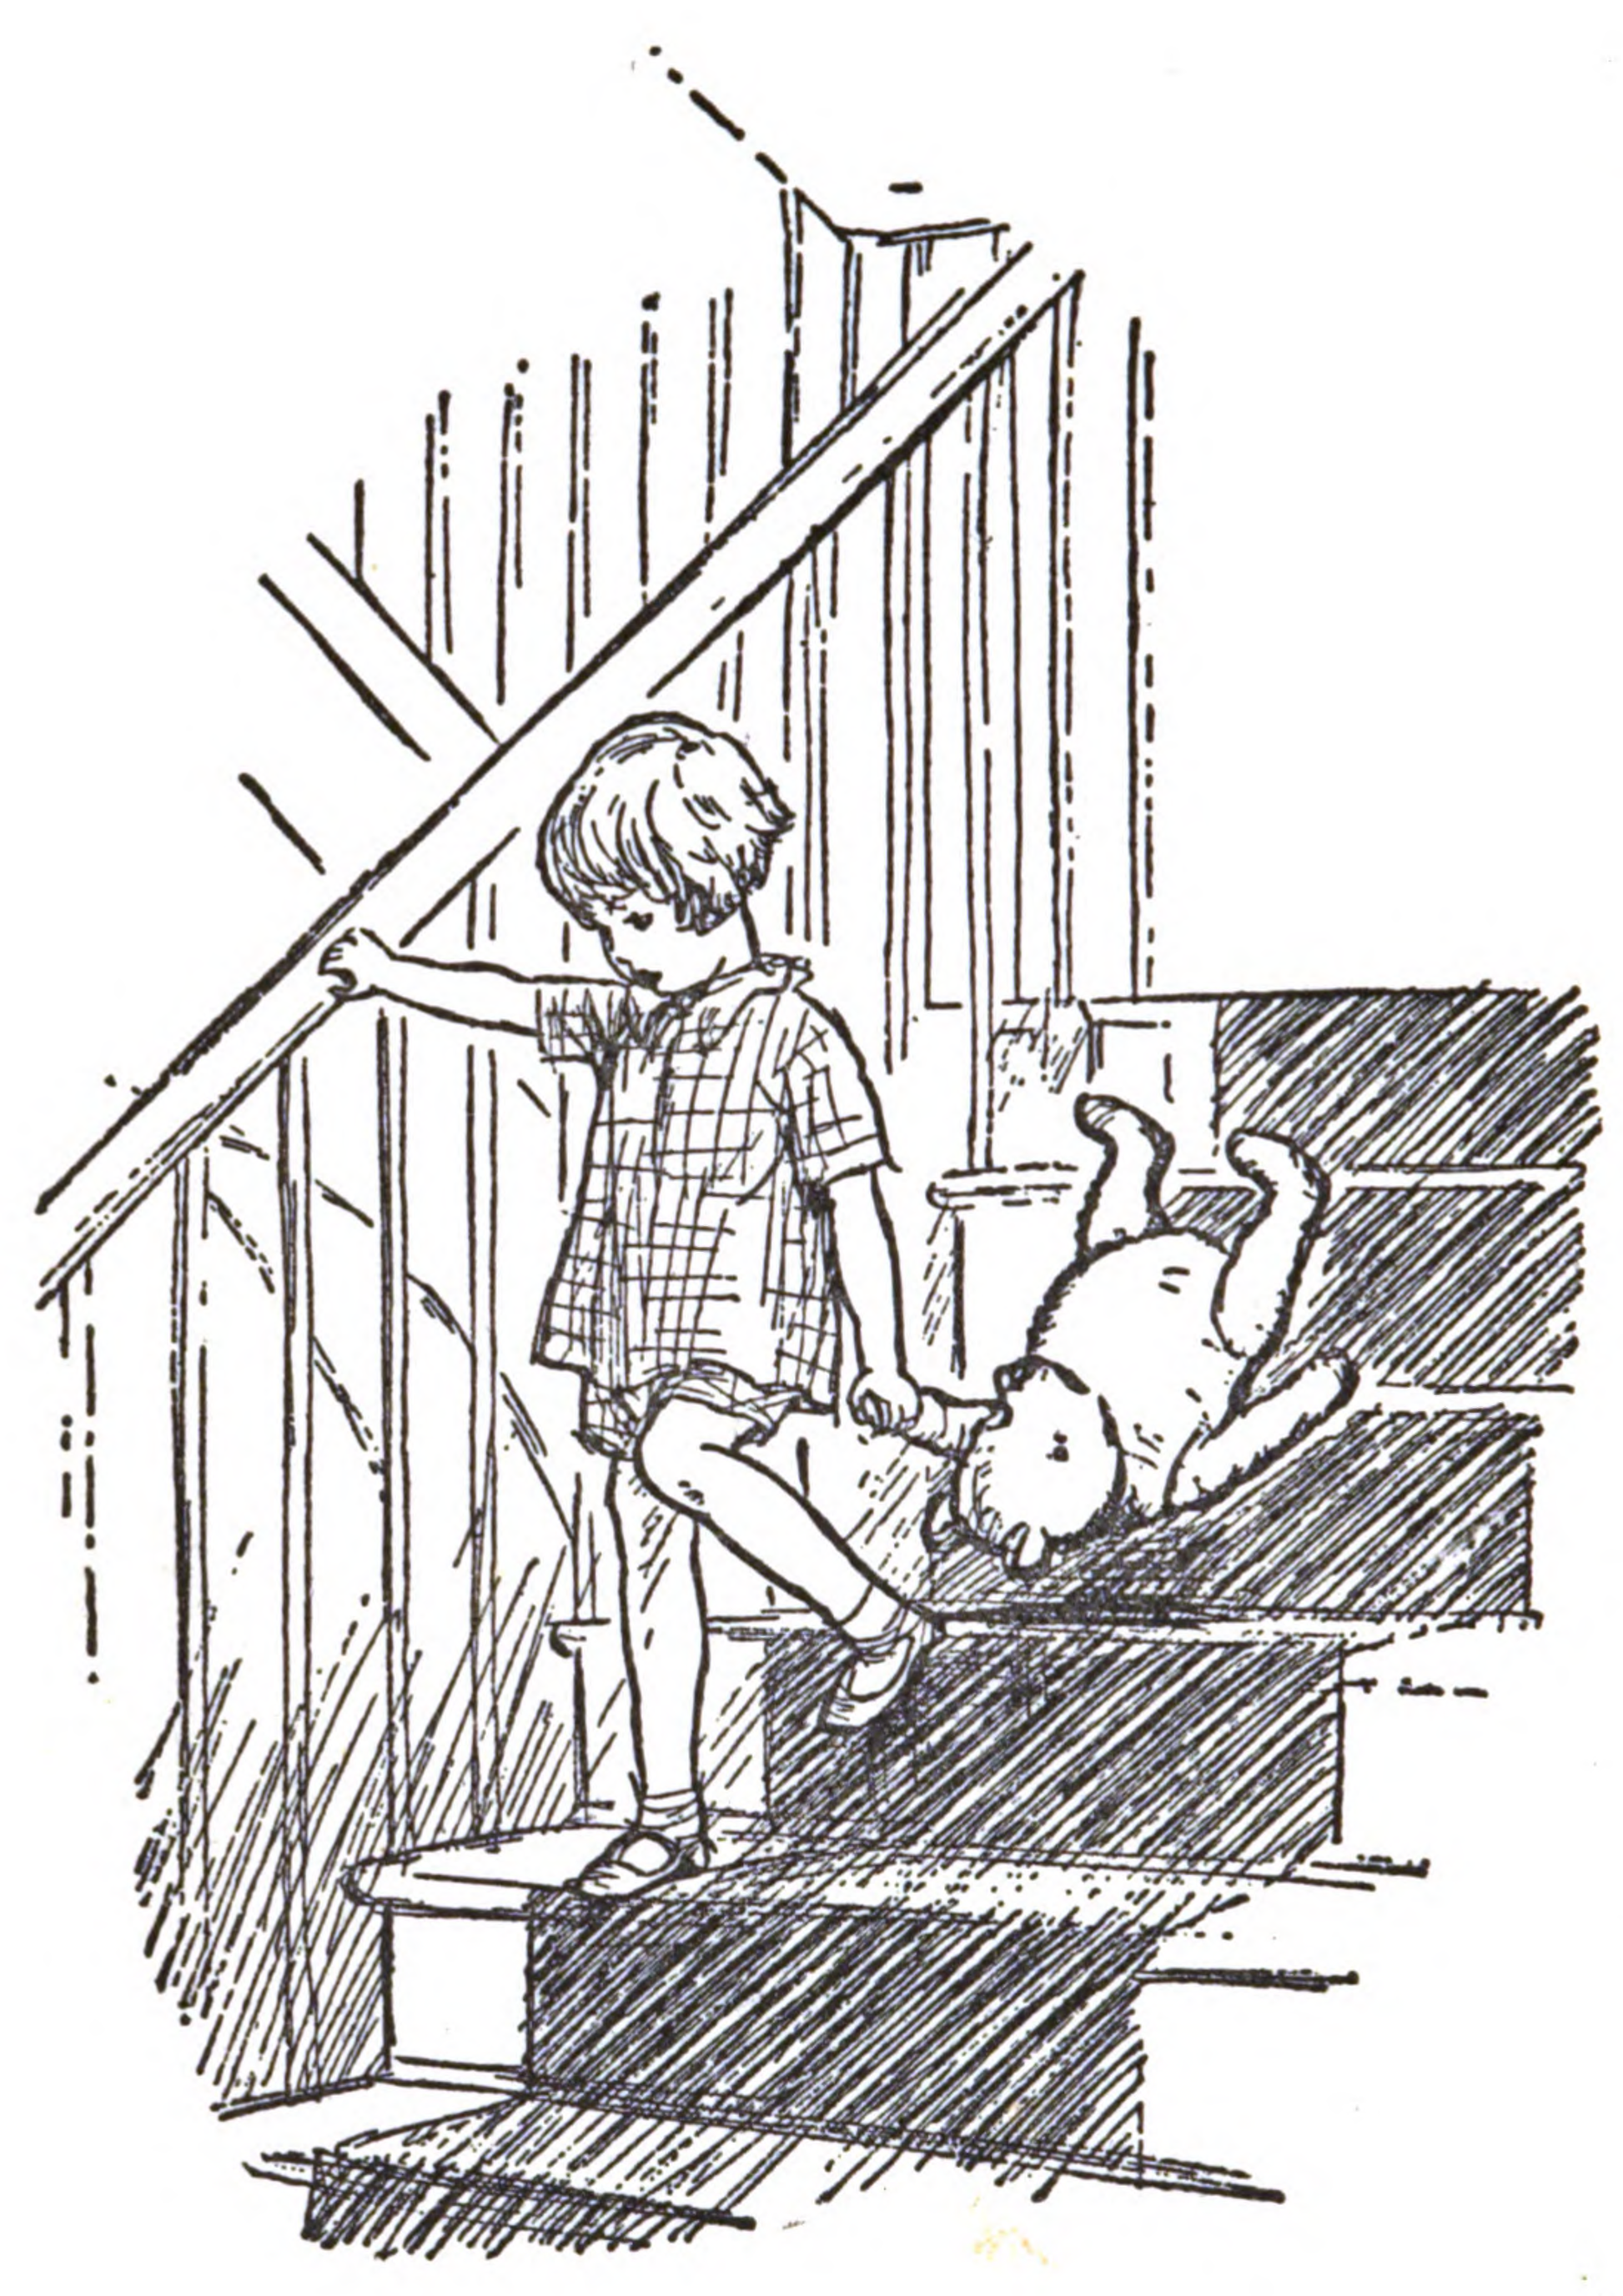 Christopher Robin on stairs (1920s) | Winnie the Pooh artwork | E H Shepard Posters, Prints, & Visual Artwork The Trumpet Shop Vintage Prints   